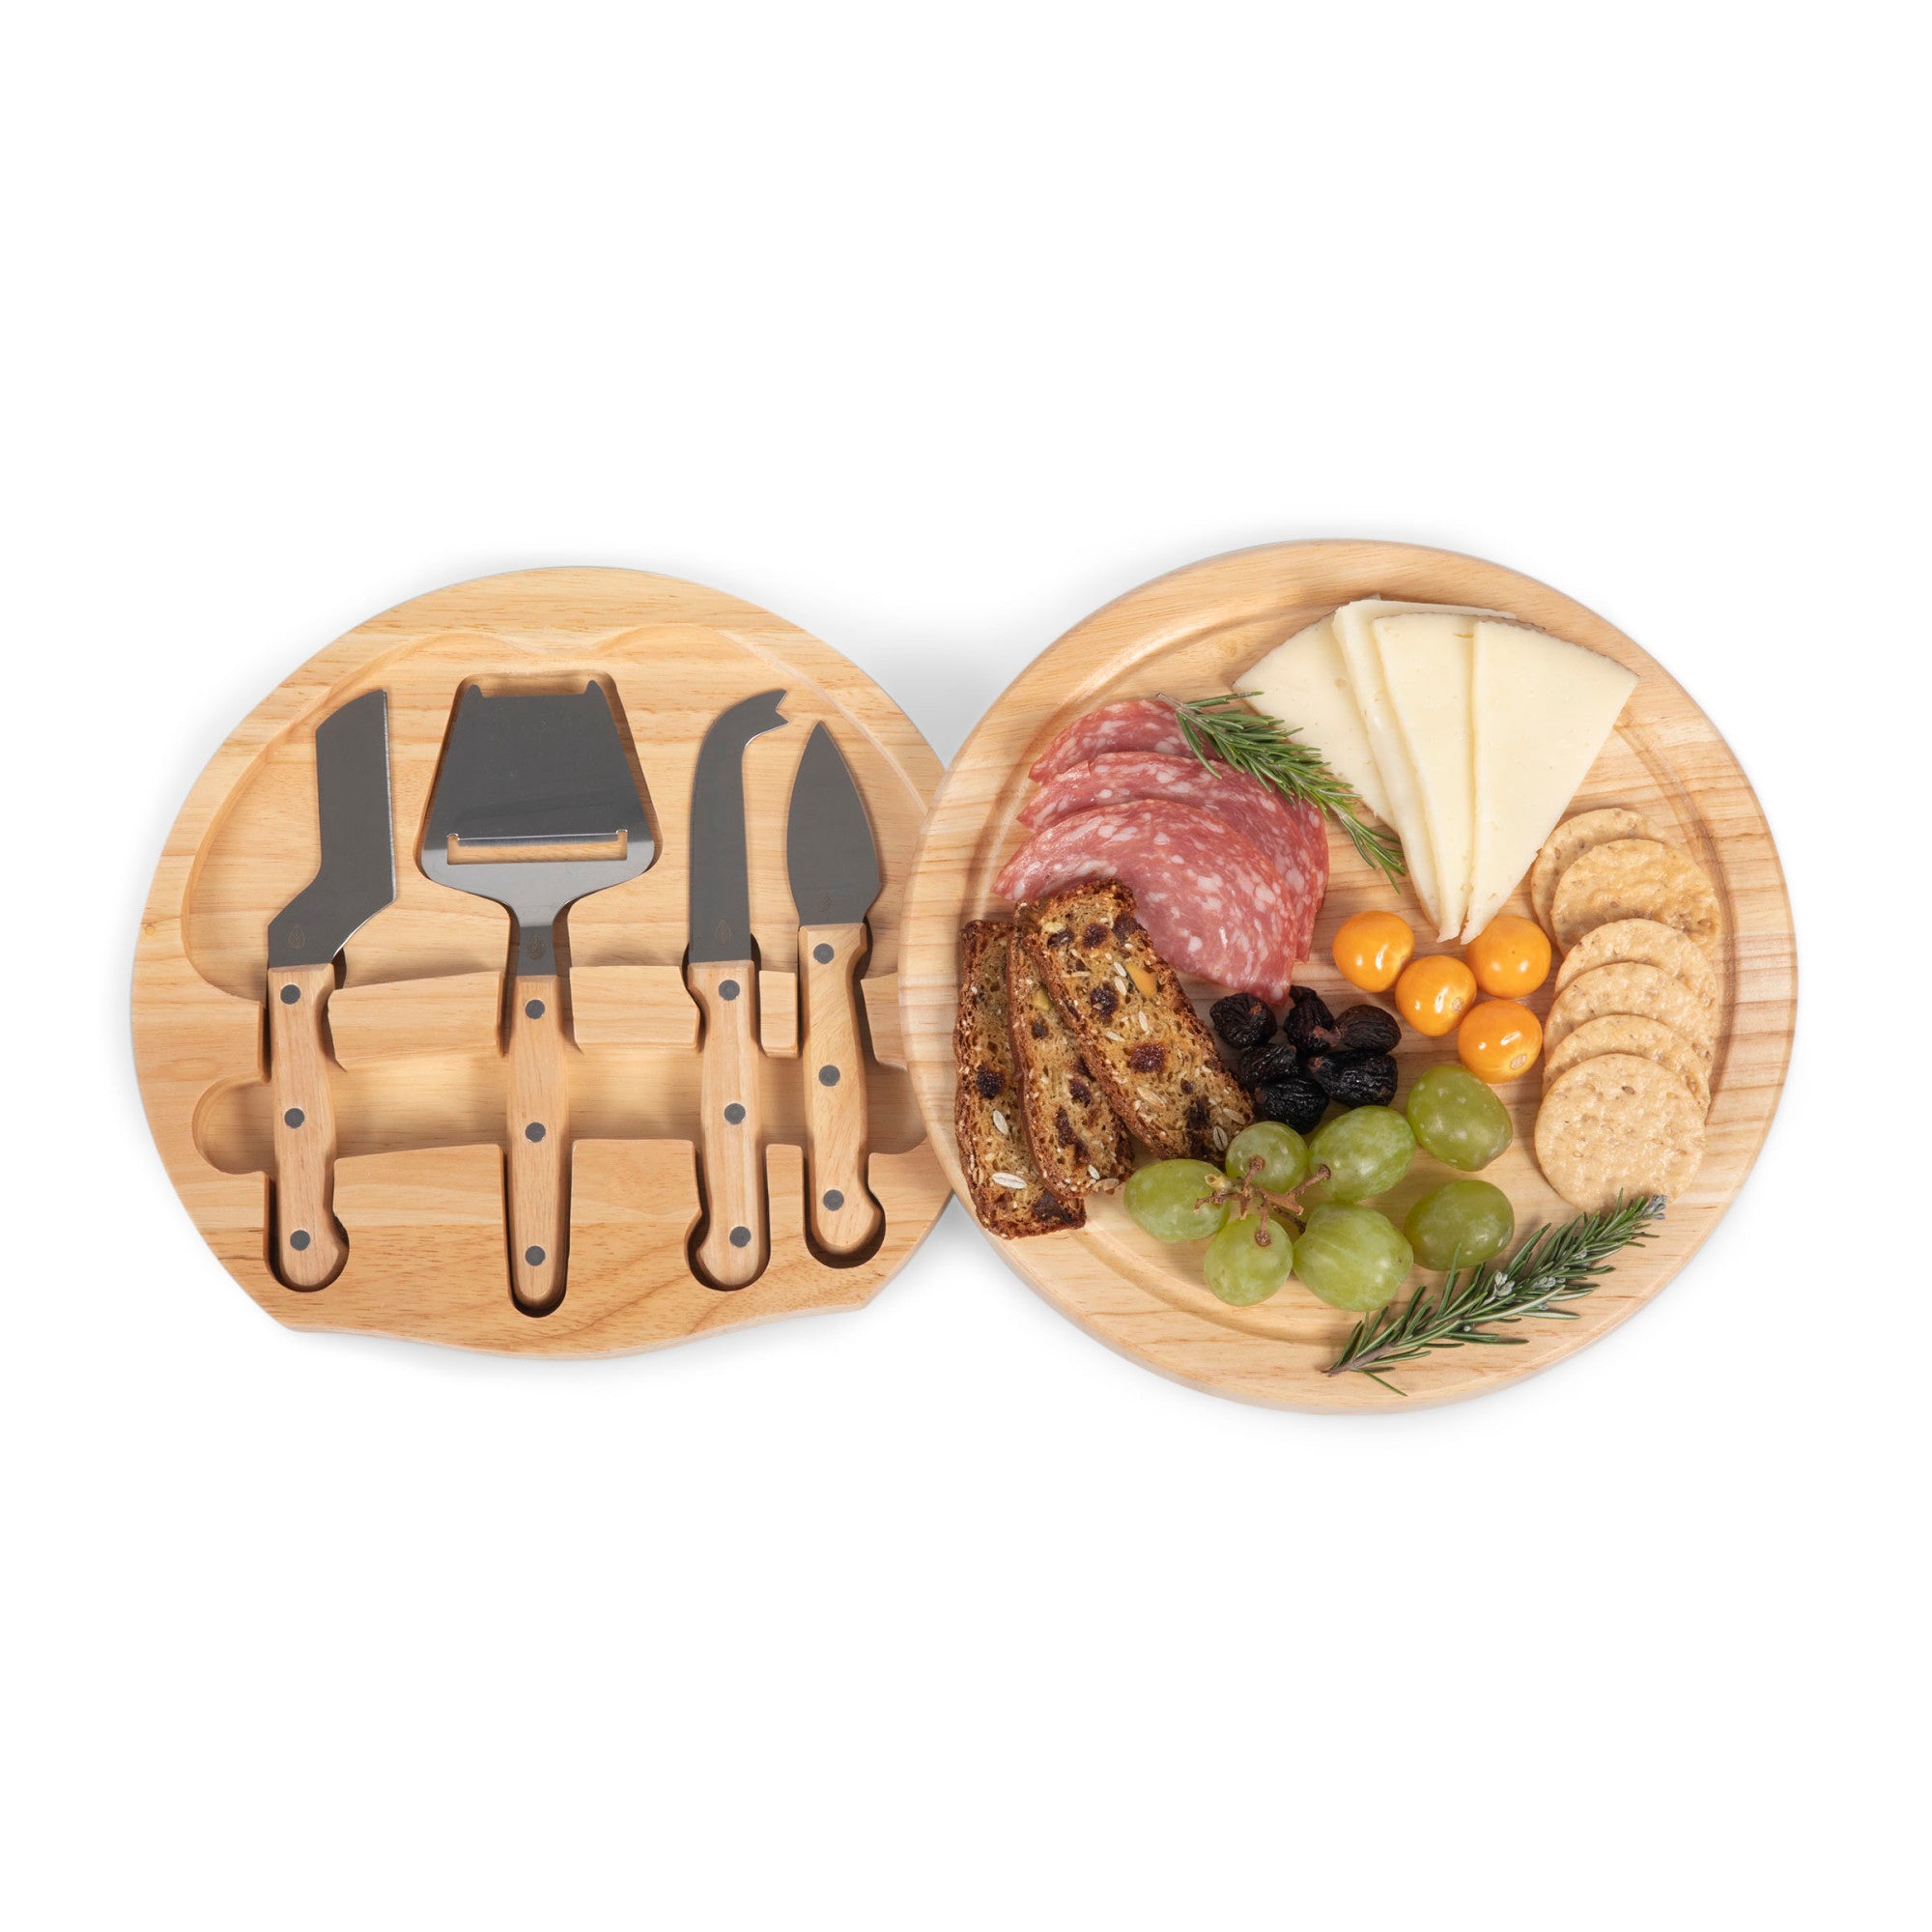 Cal State Fullerton Titans - Circo Cheese Cutting Board & Tools Set